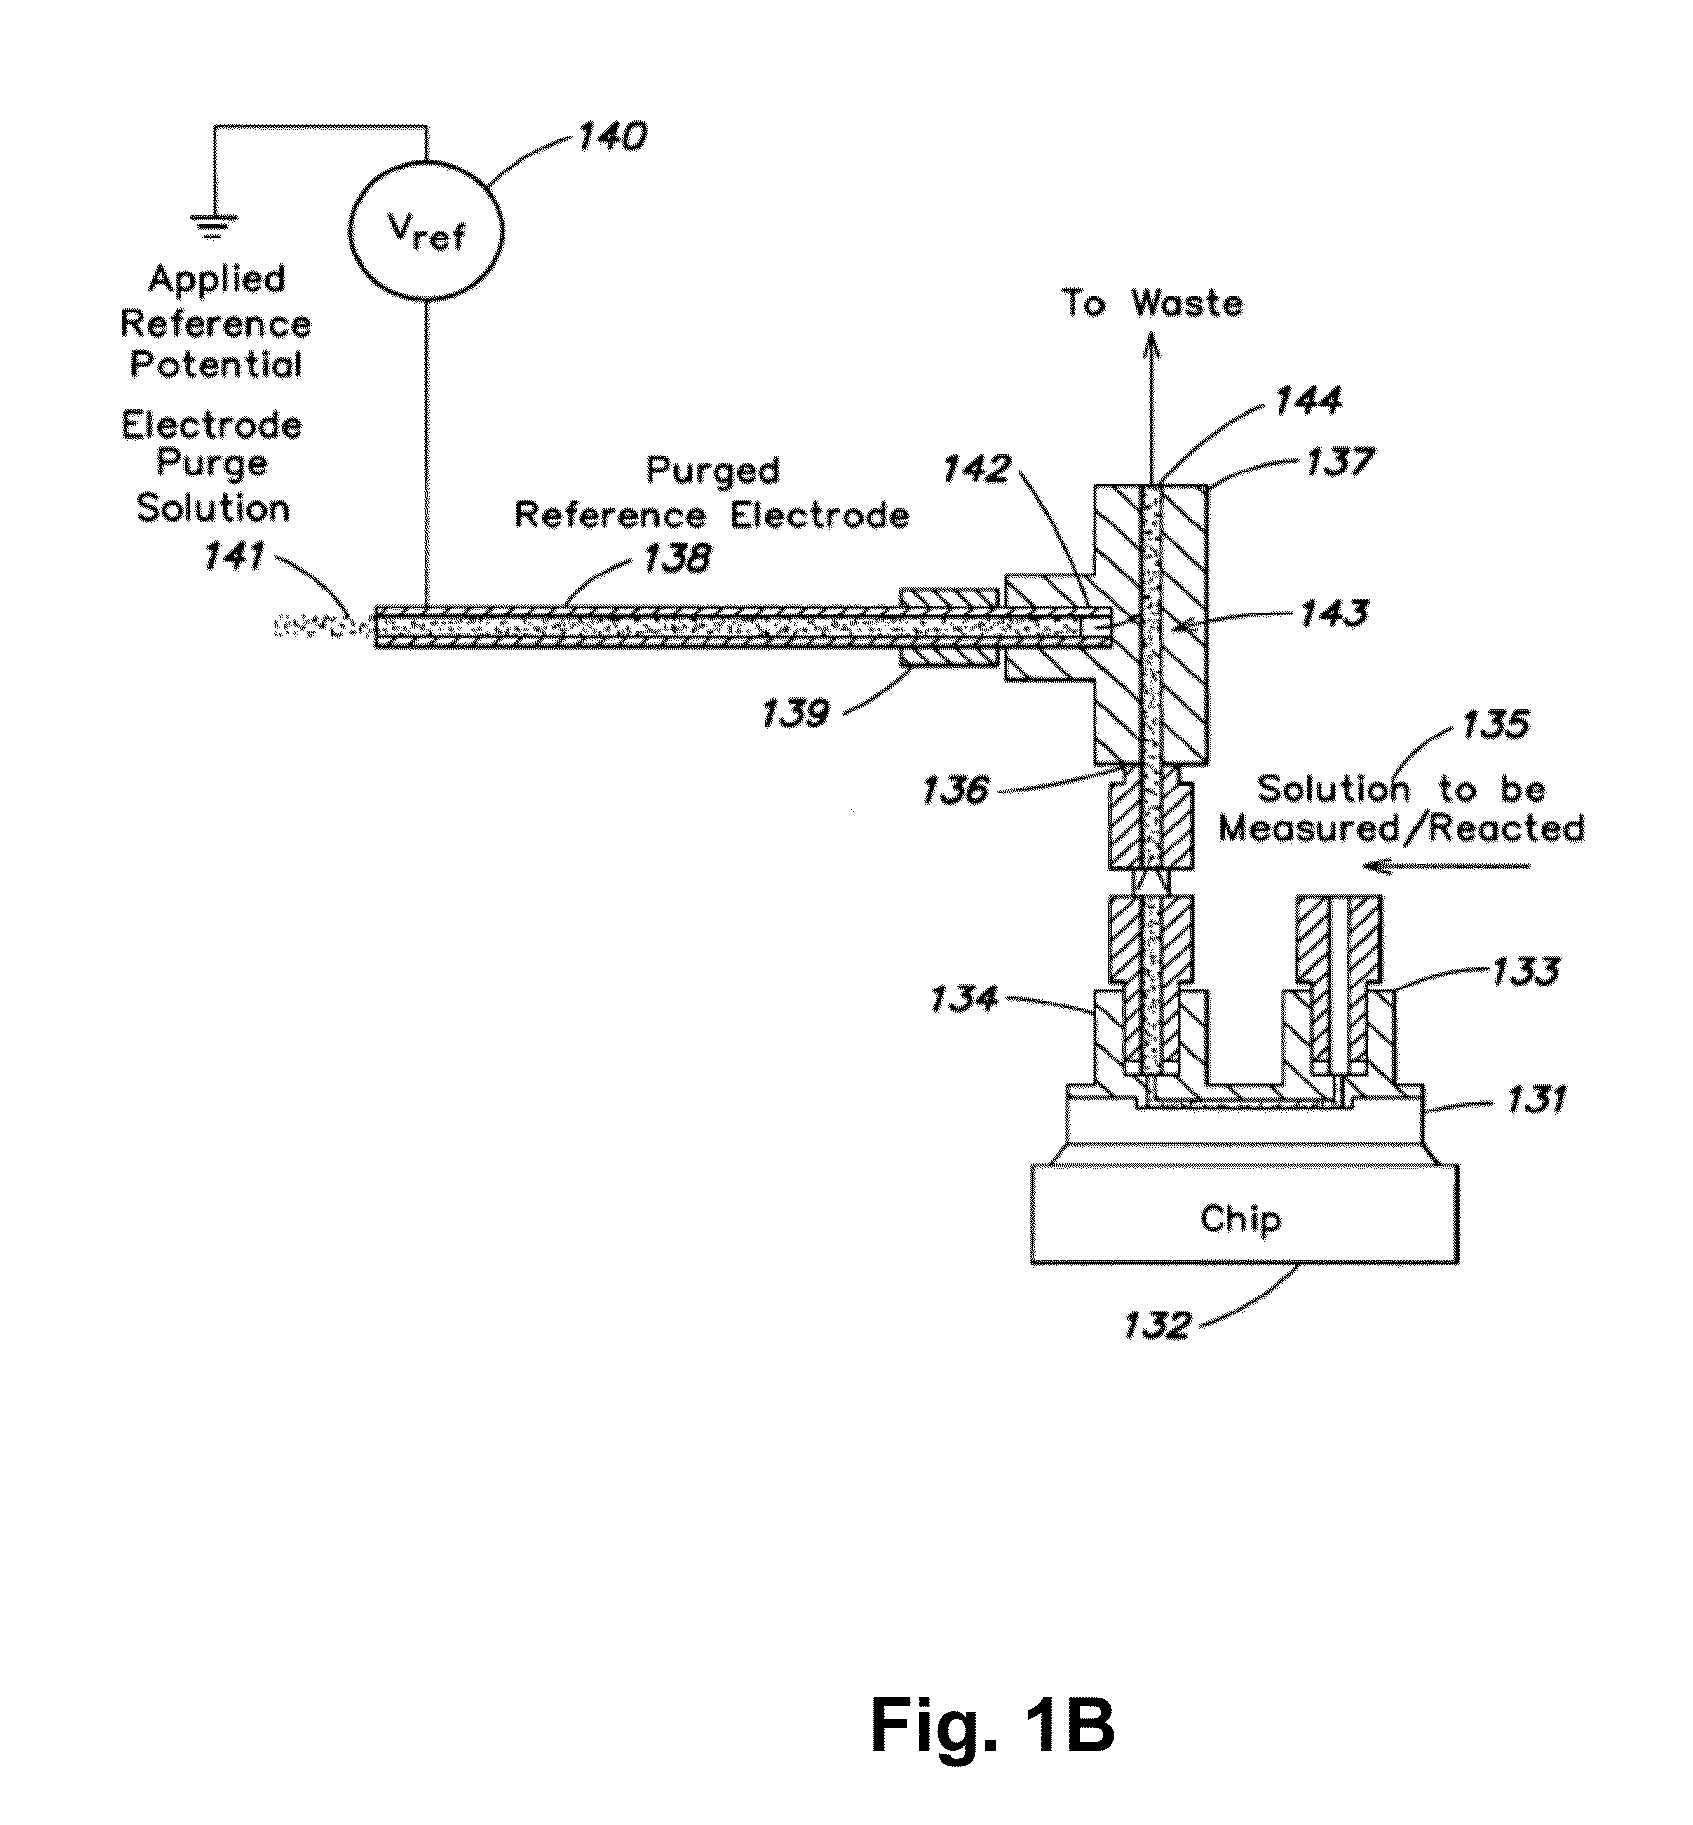 Apparatus and methods for performing electrochemical reactions